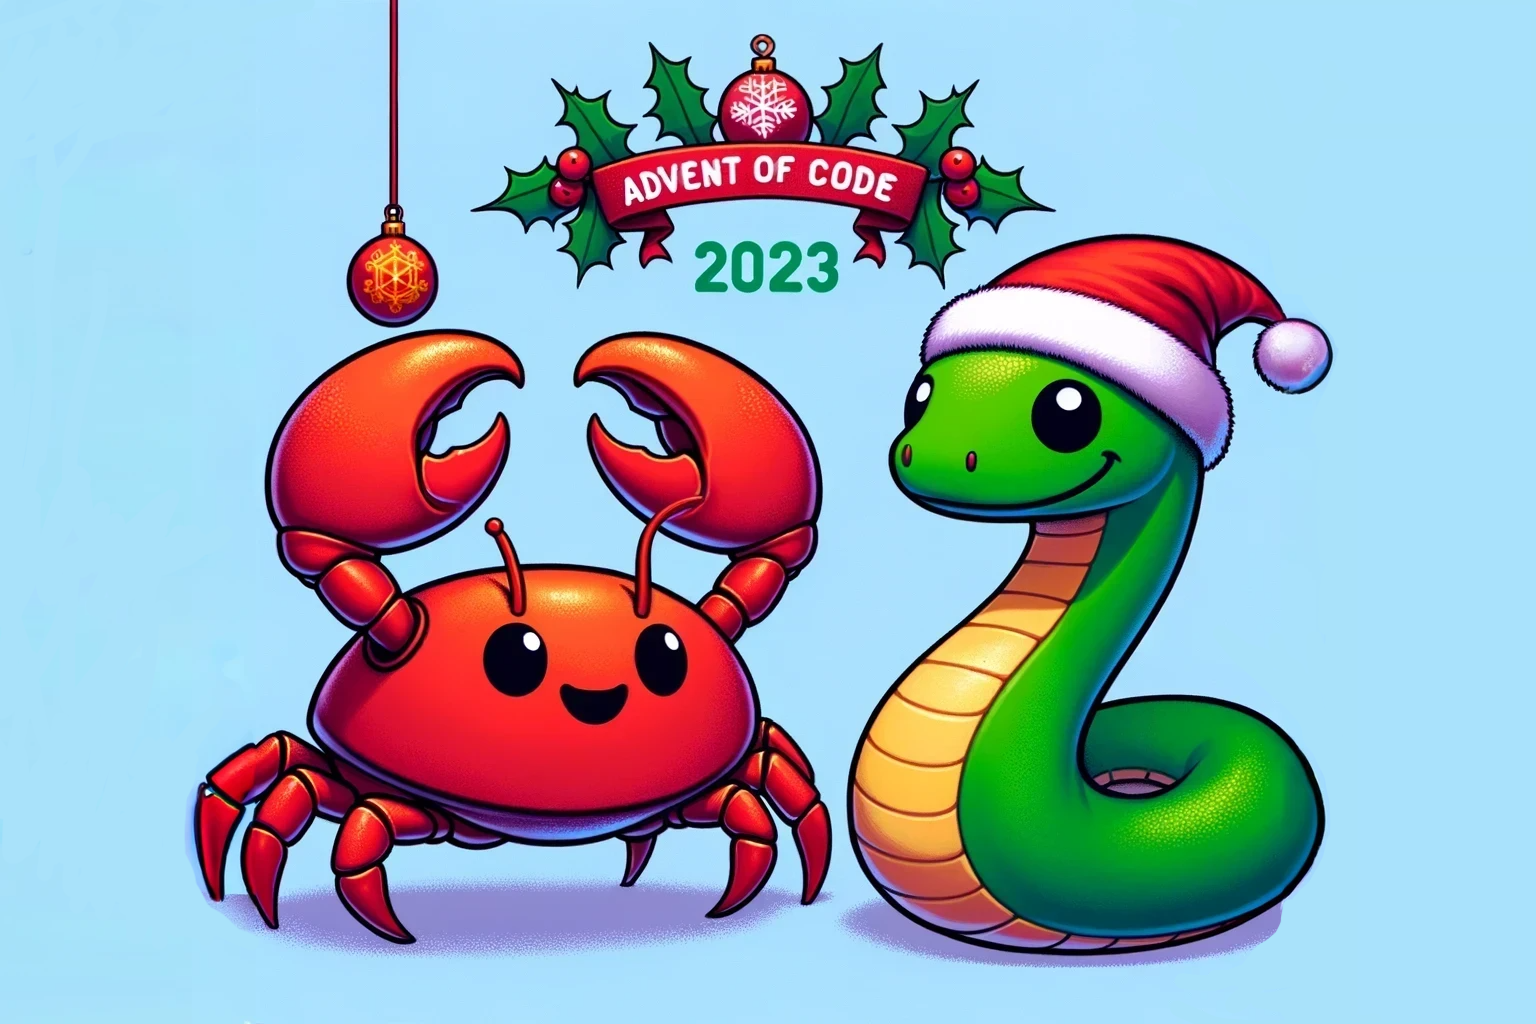 Rust crab and Python snake celebrating Advent of Code 2023